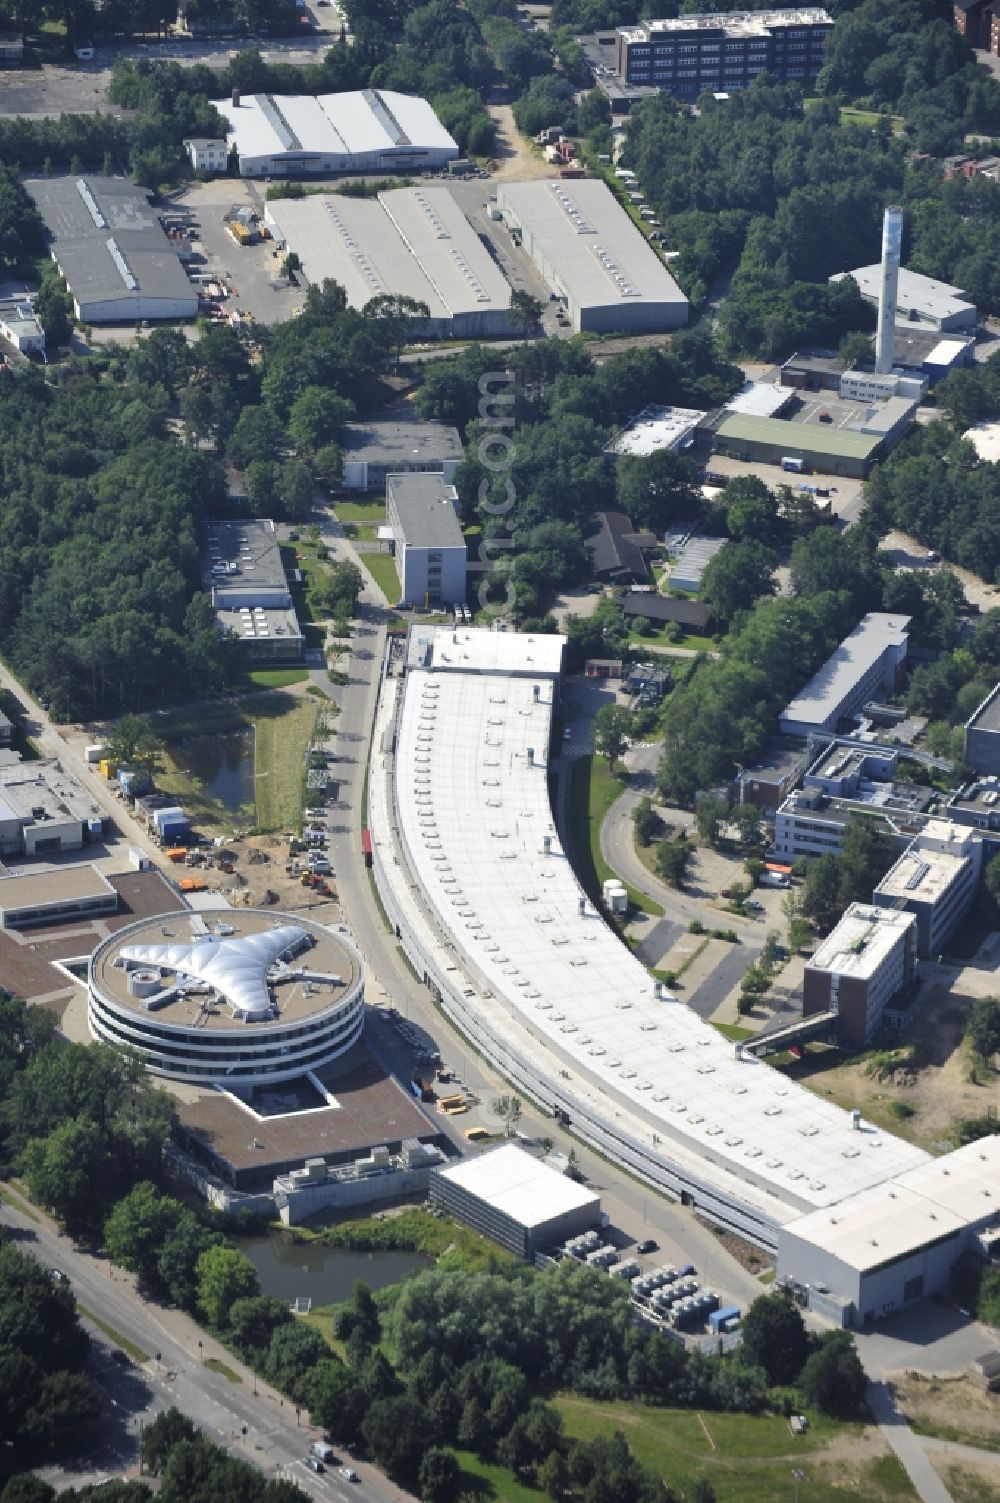 Aerial image Hamburg - The new building of the site of EMBL, the European Molecular Biology Laboratory (EMBL) at the particle accelerator Petra III Hamburg. The European Molecular Biology Laboratory is a non-profit organisation and a basic research institute funded by public research monies from 20 member states and one associate member